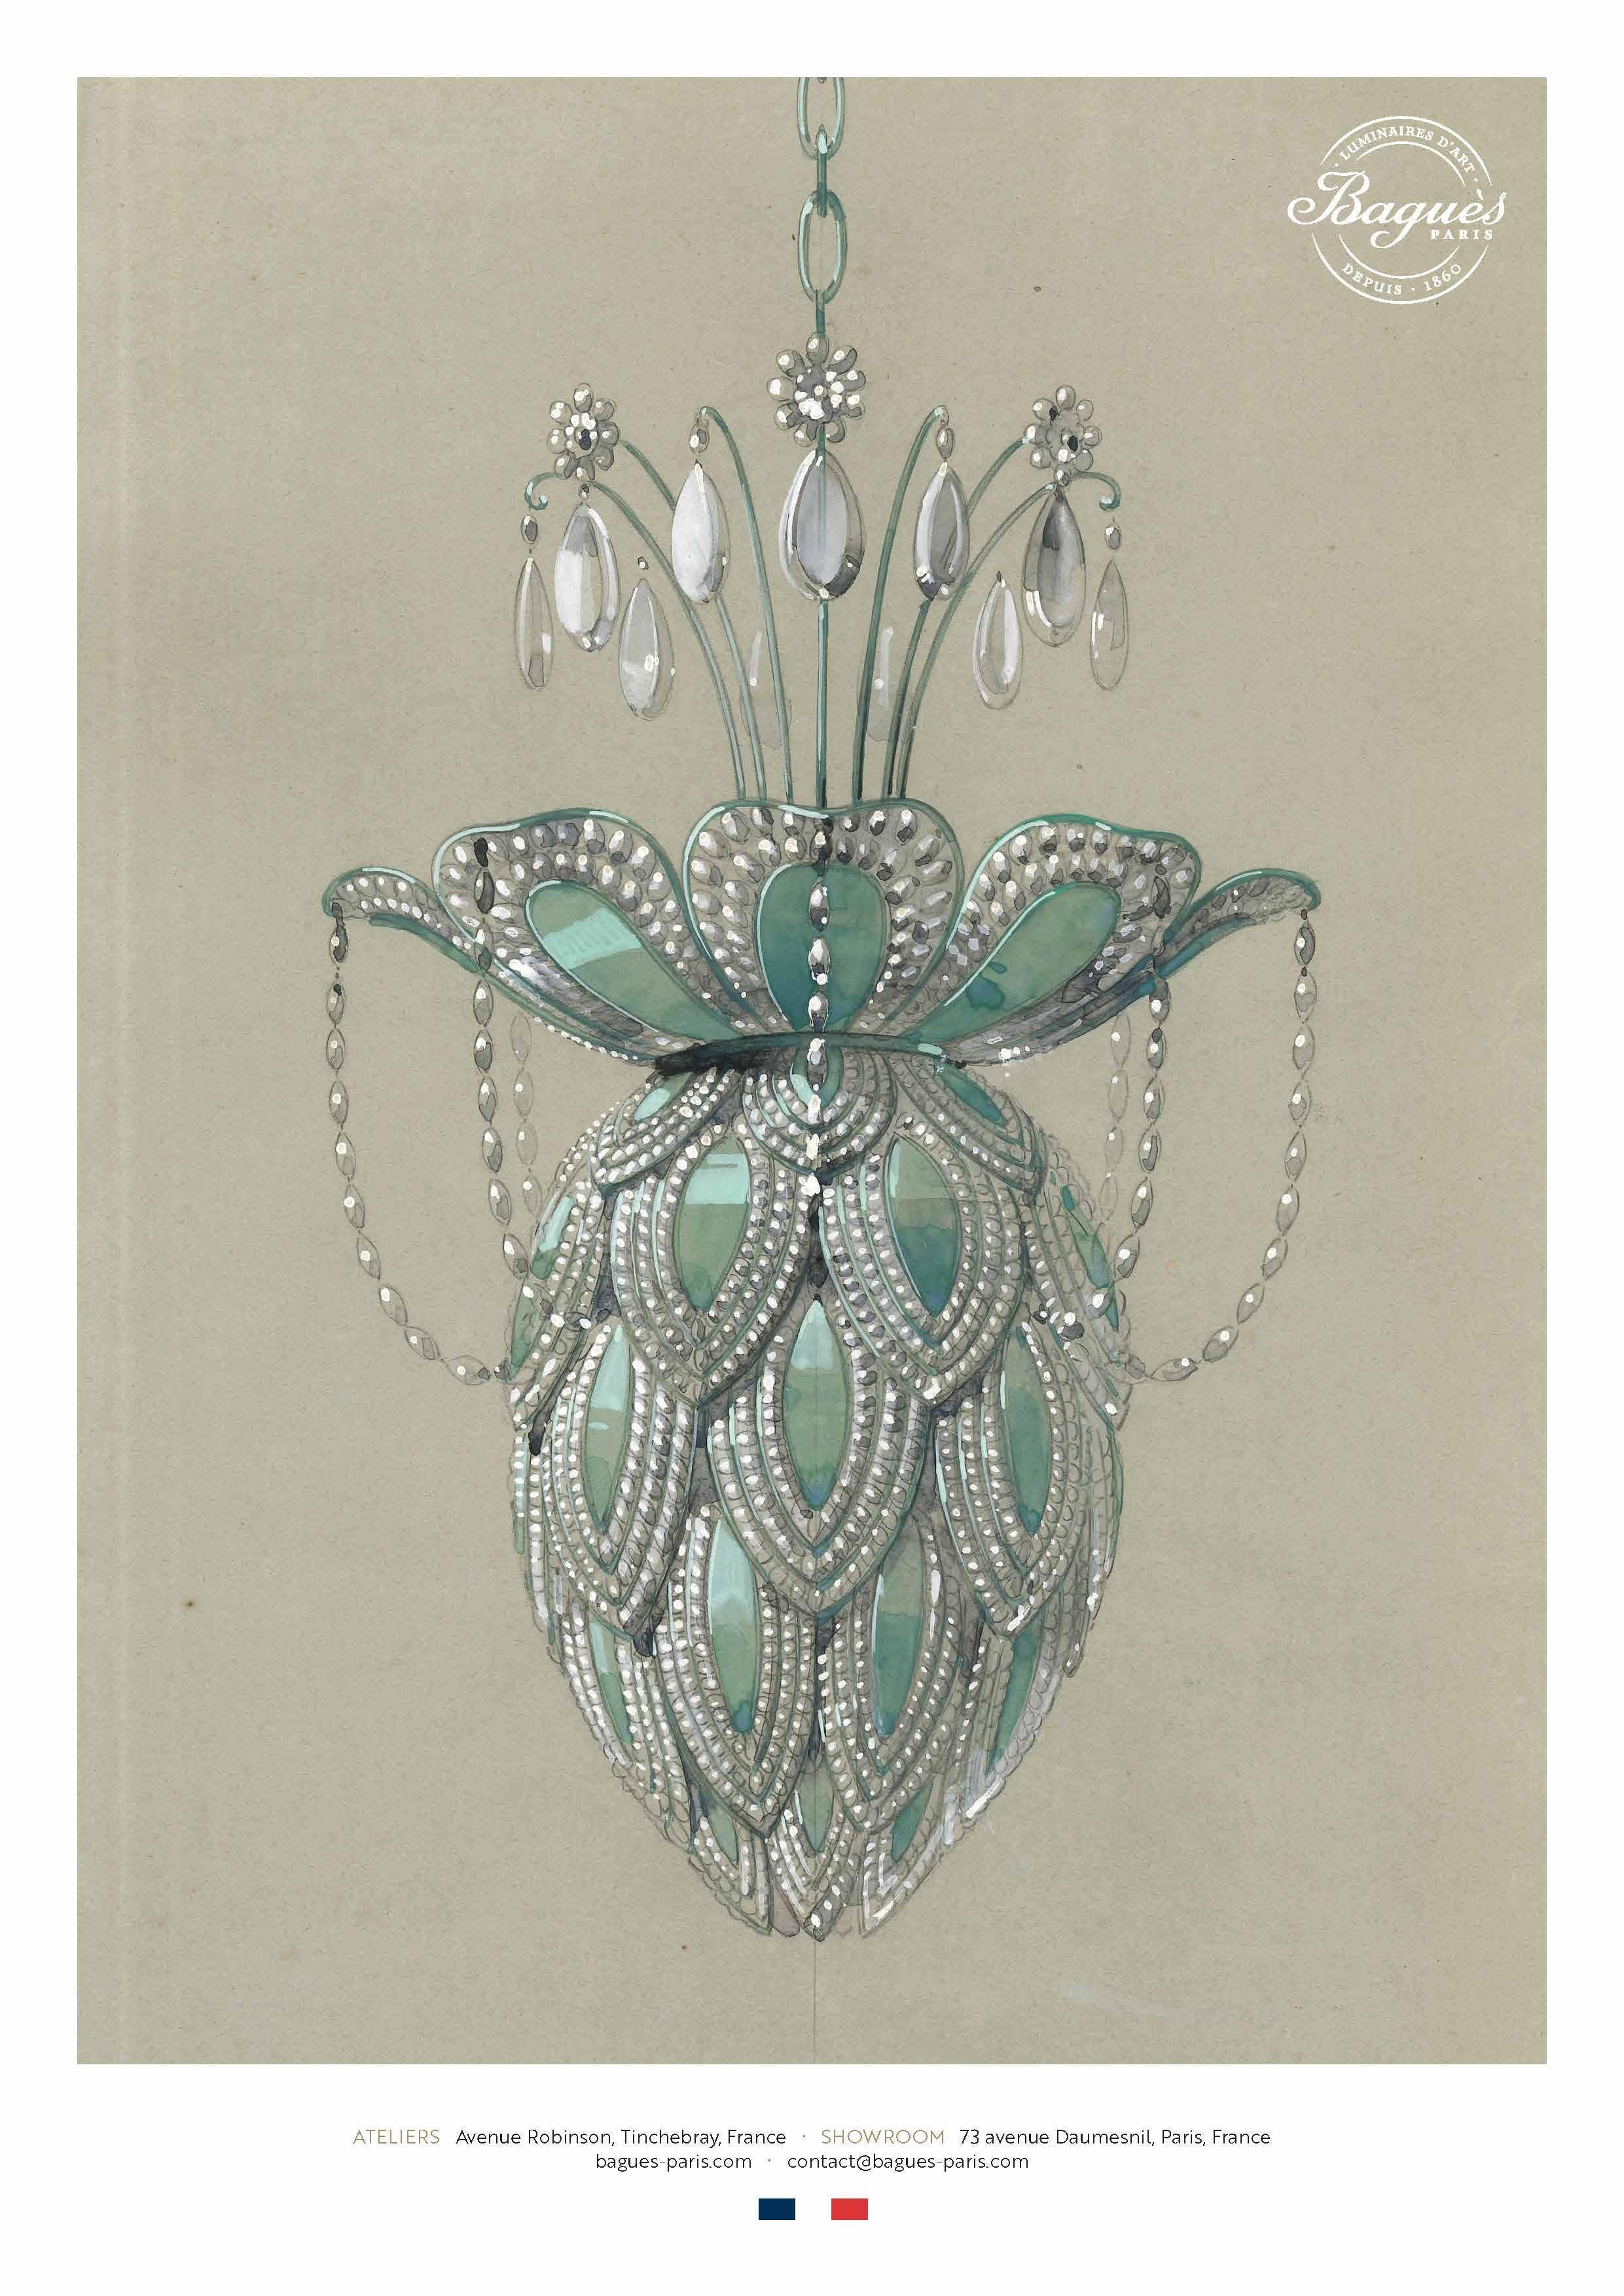 French Certified Maison Bagues Chandelier, 10 Lights Iron & Crystal #14652 For Sale